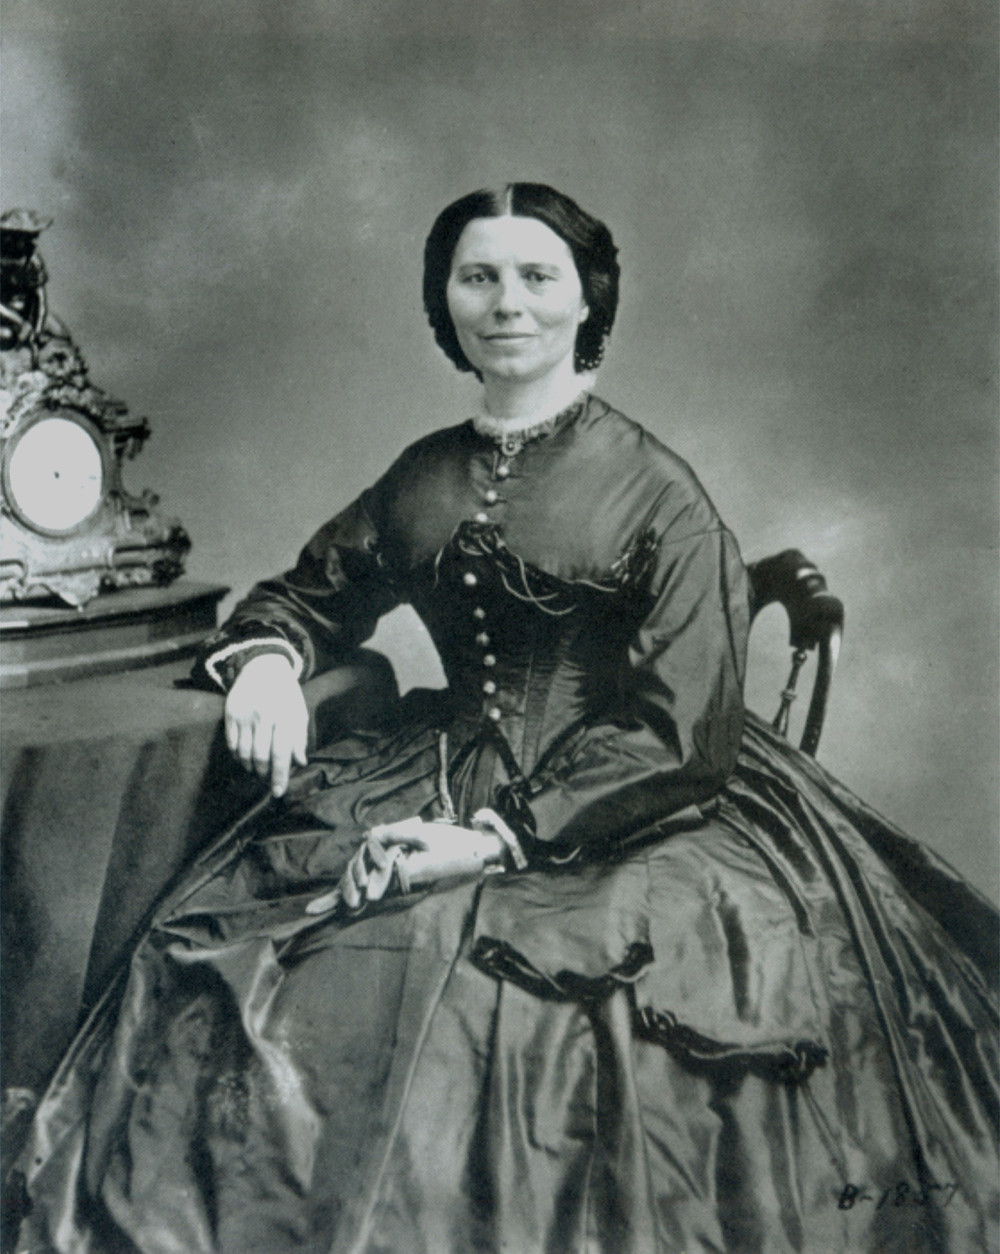 ** FILE ** Clara Barton, who is well-known for her service on the battlefields during the Civil War and for her work establishing the American Red Cross, is seen in this undated black and white file photo. A virtual time capsule of Barton memorabilia was discovered by a government carpenter in 1997.  (AP Photo/National Archives)